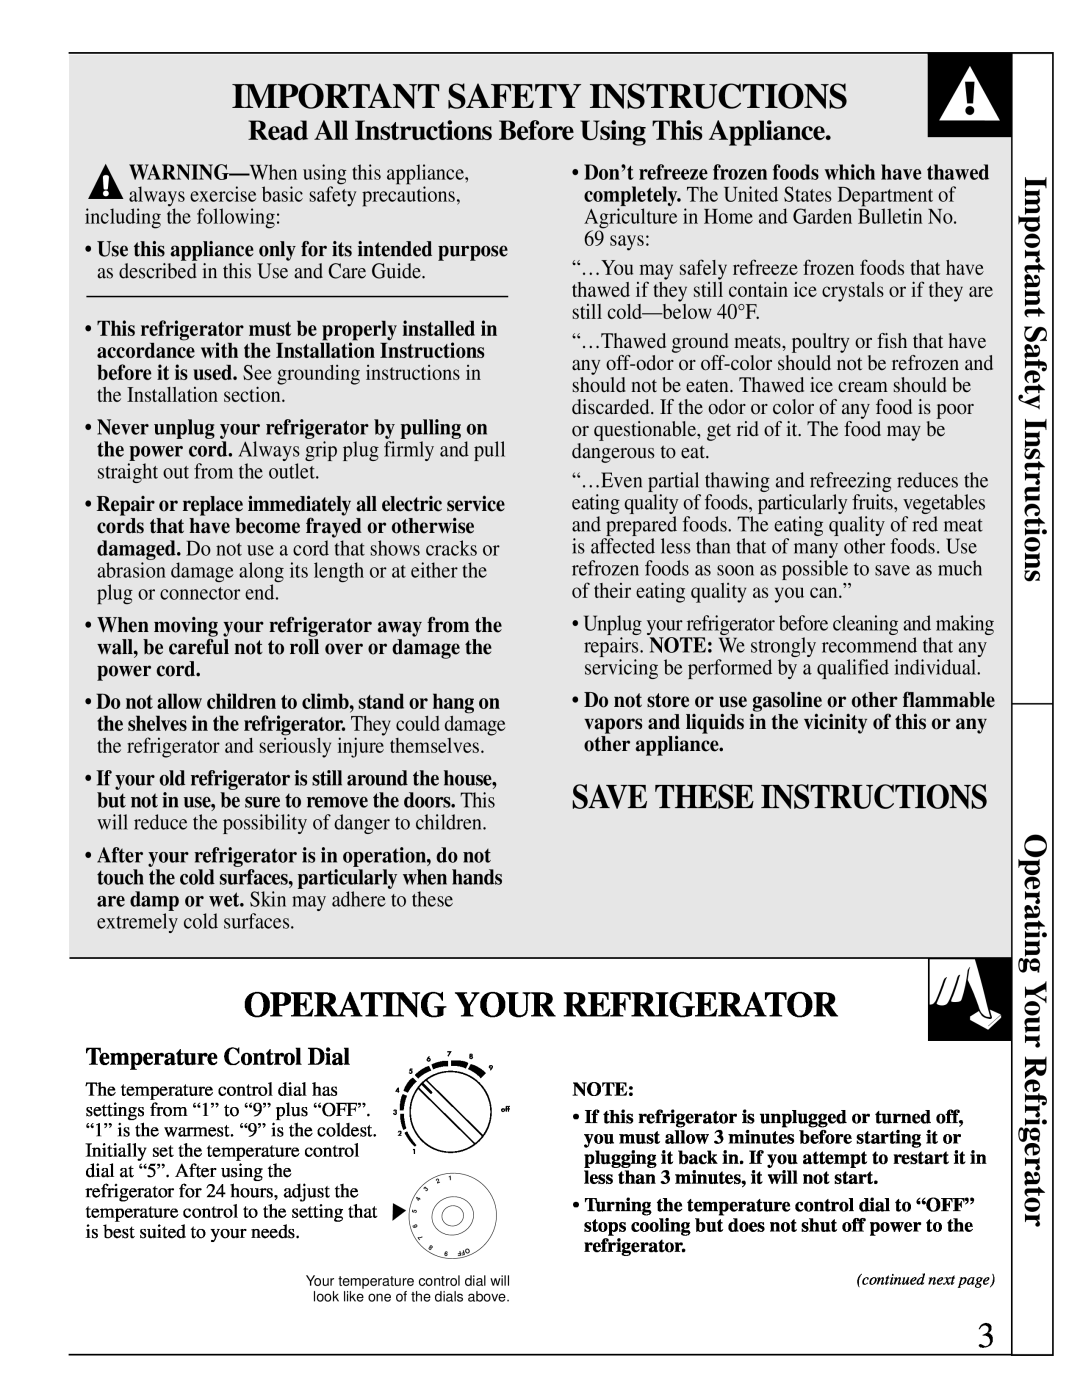 GE SC4, TAX4 Important Safety Instructions, Operating Your Refrigerator, Save These Instructions, Temperature Control Dial 